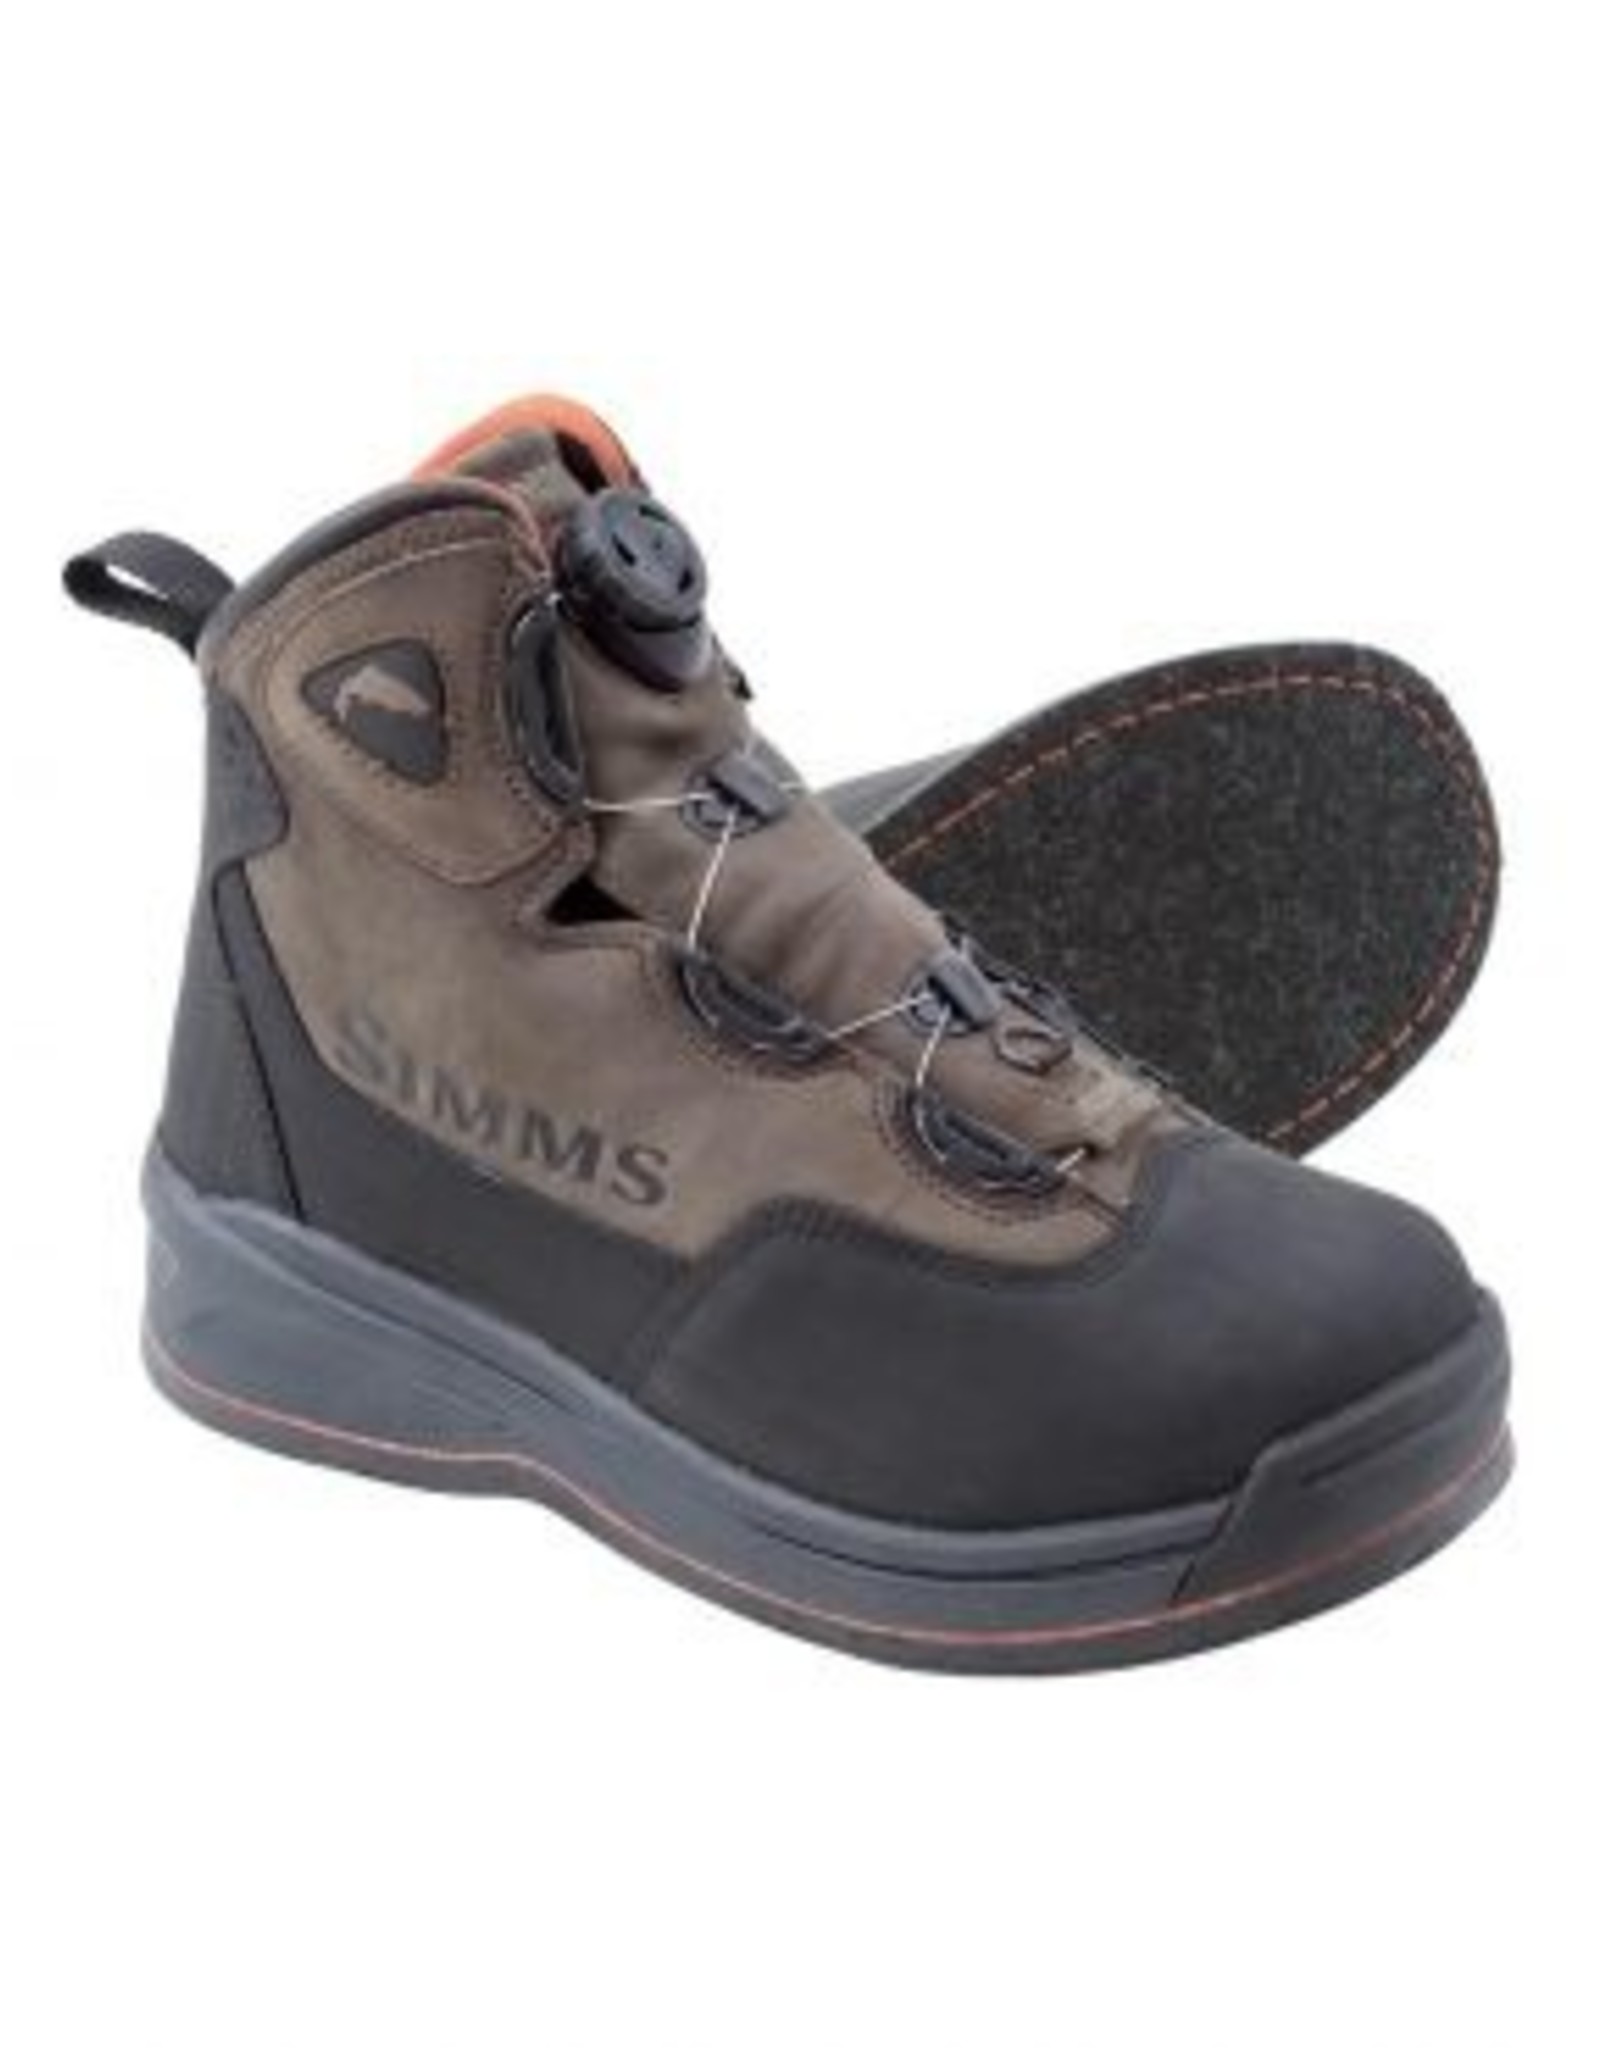 Simms Headwaters Boa Wading Boots - Felt Soles